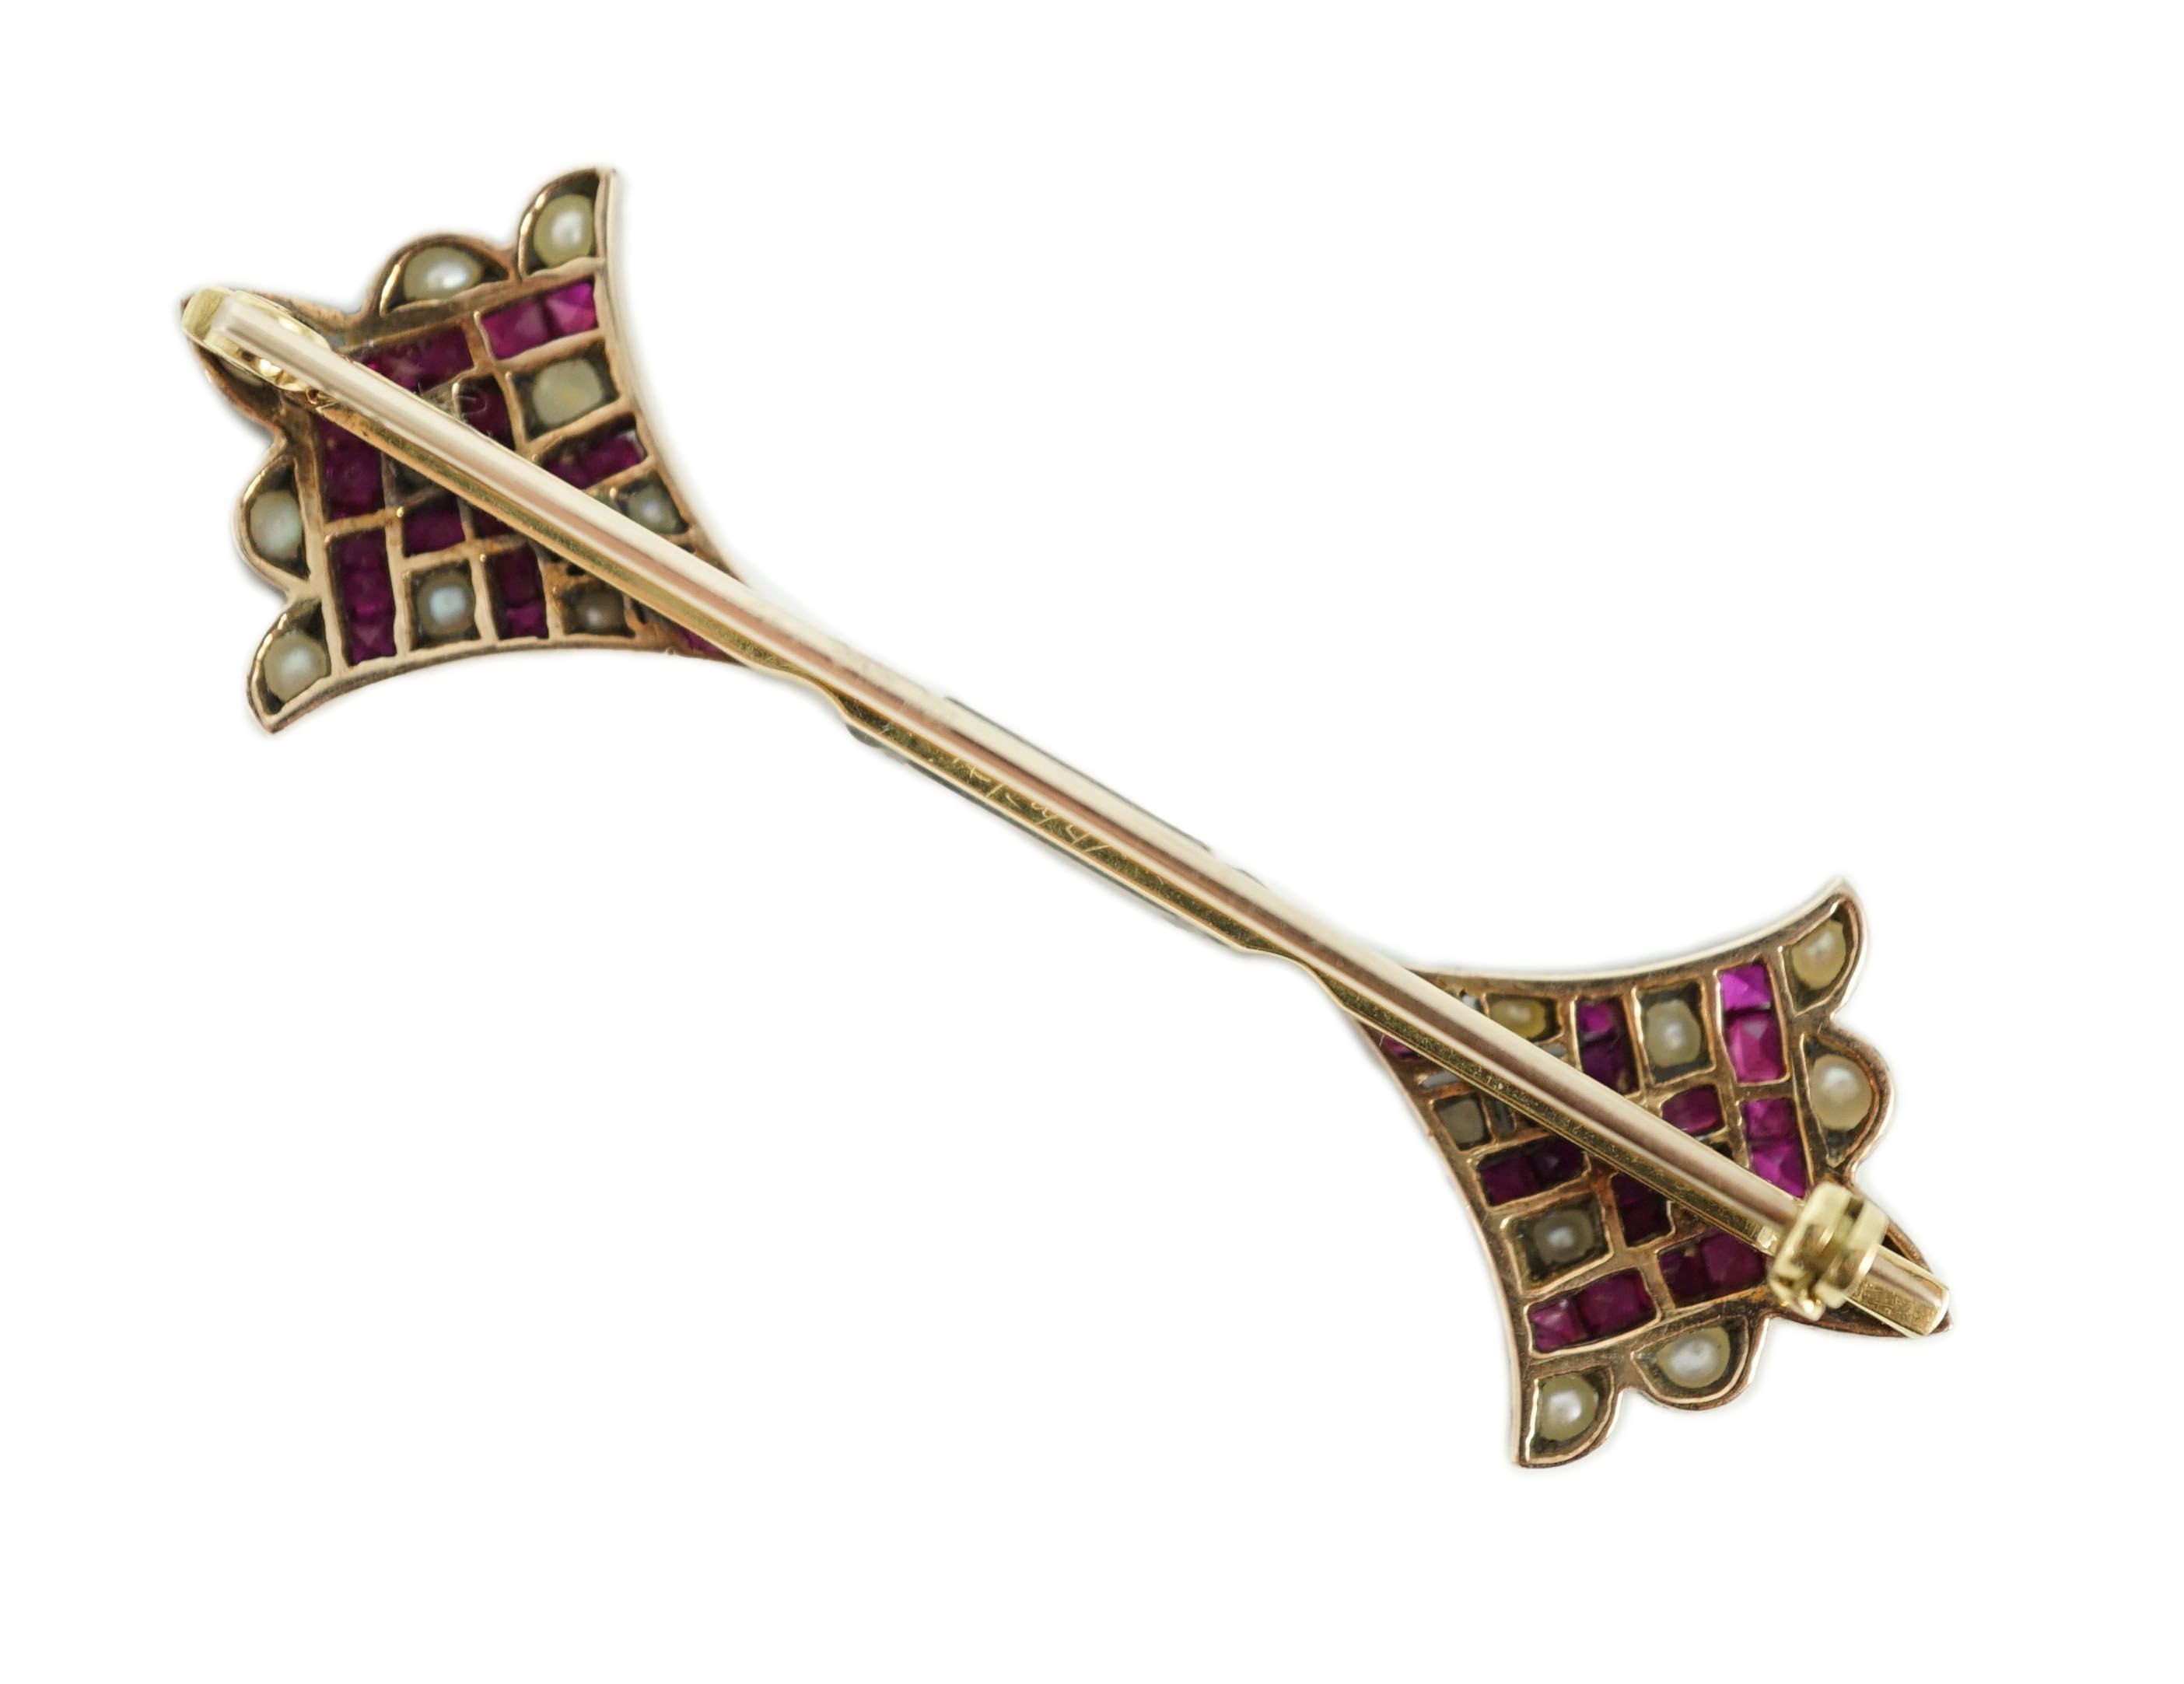 An early 20th century, gold, platinum, ruby and seed pearl set brooch